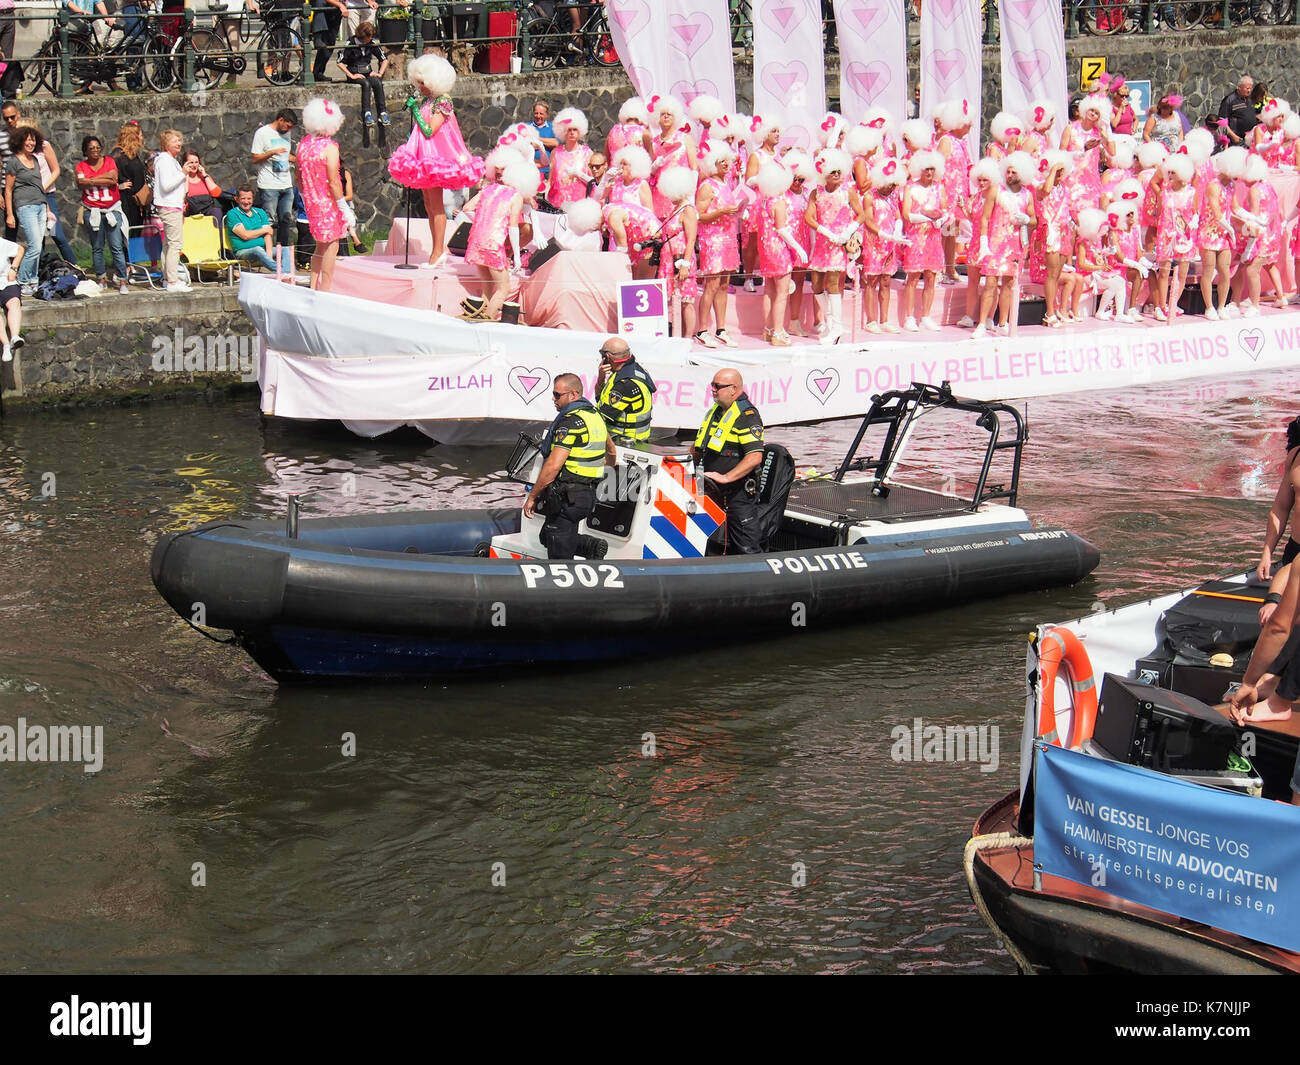 P502 Politieboot, Canal Parade Amsterdam 2017 foto 1 Stock Photo